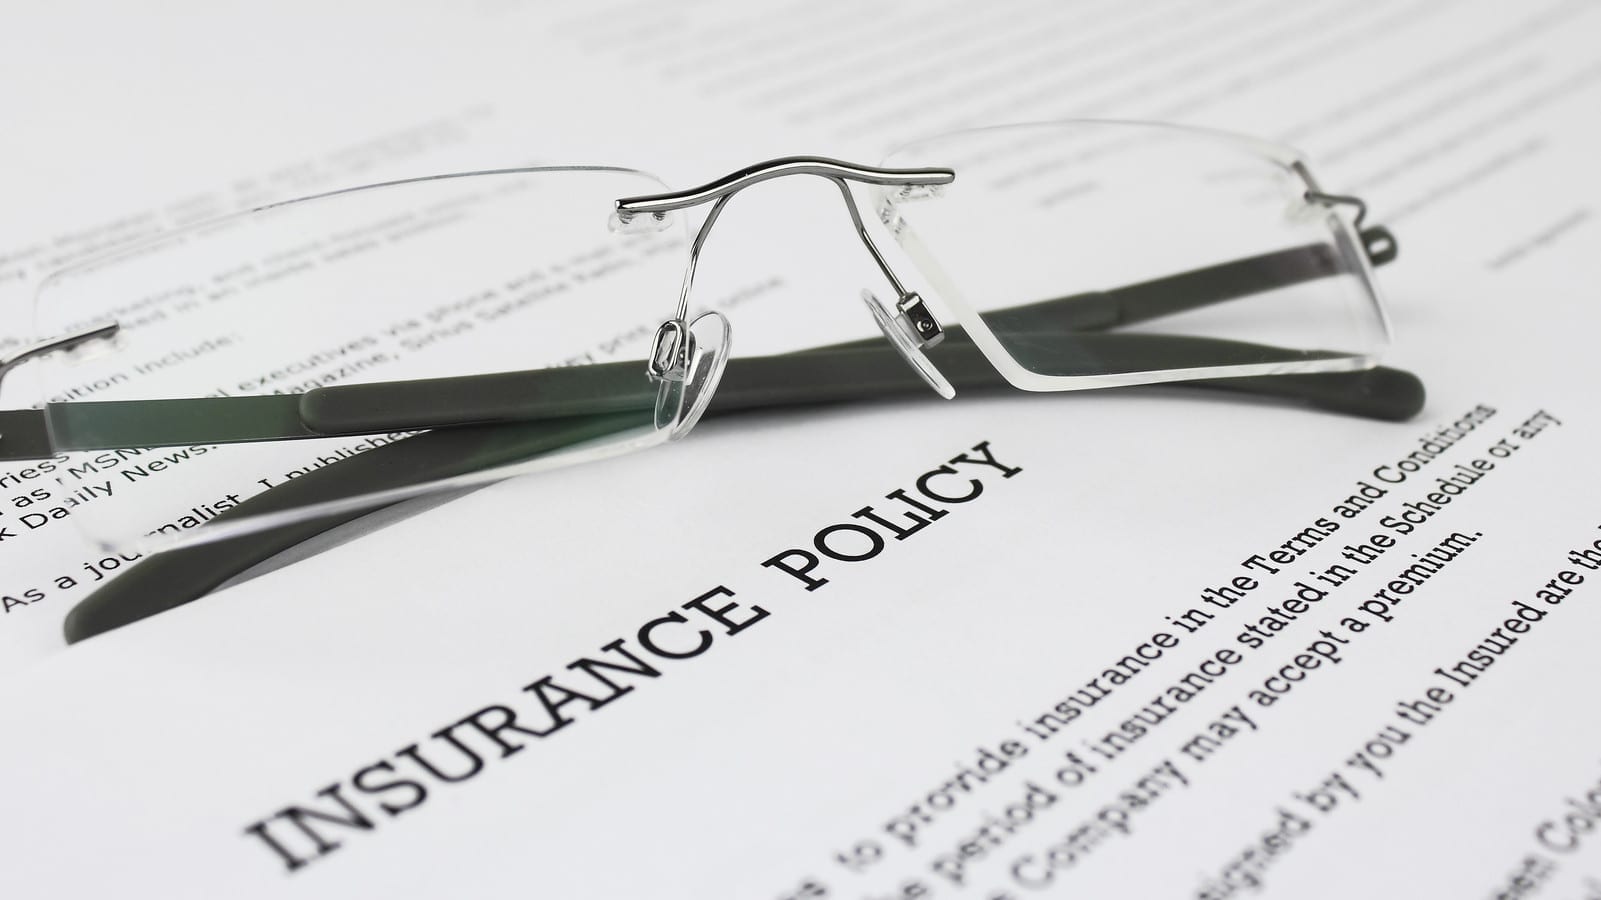 Stock Photo of an Insurance Policy Form